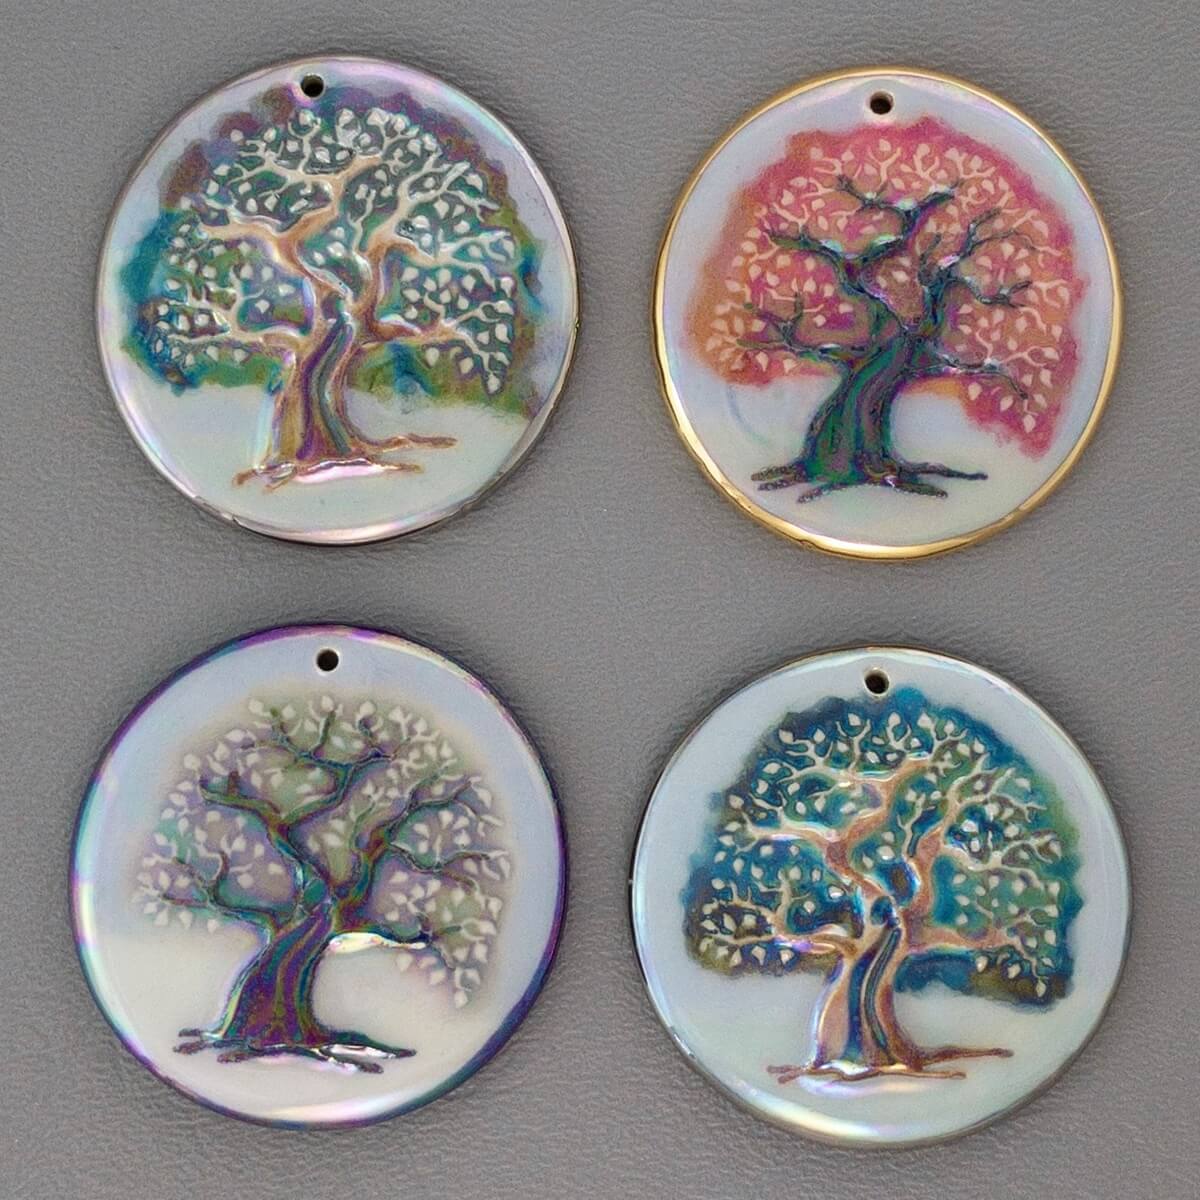 Statement tree pendants decorated in summer, fall & winter colors.